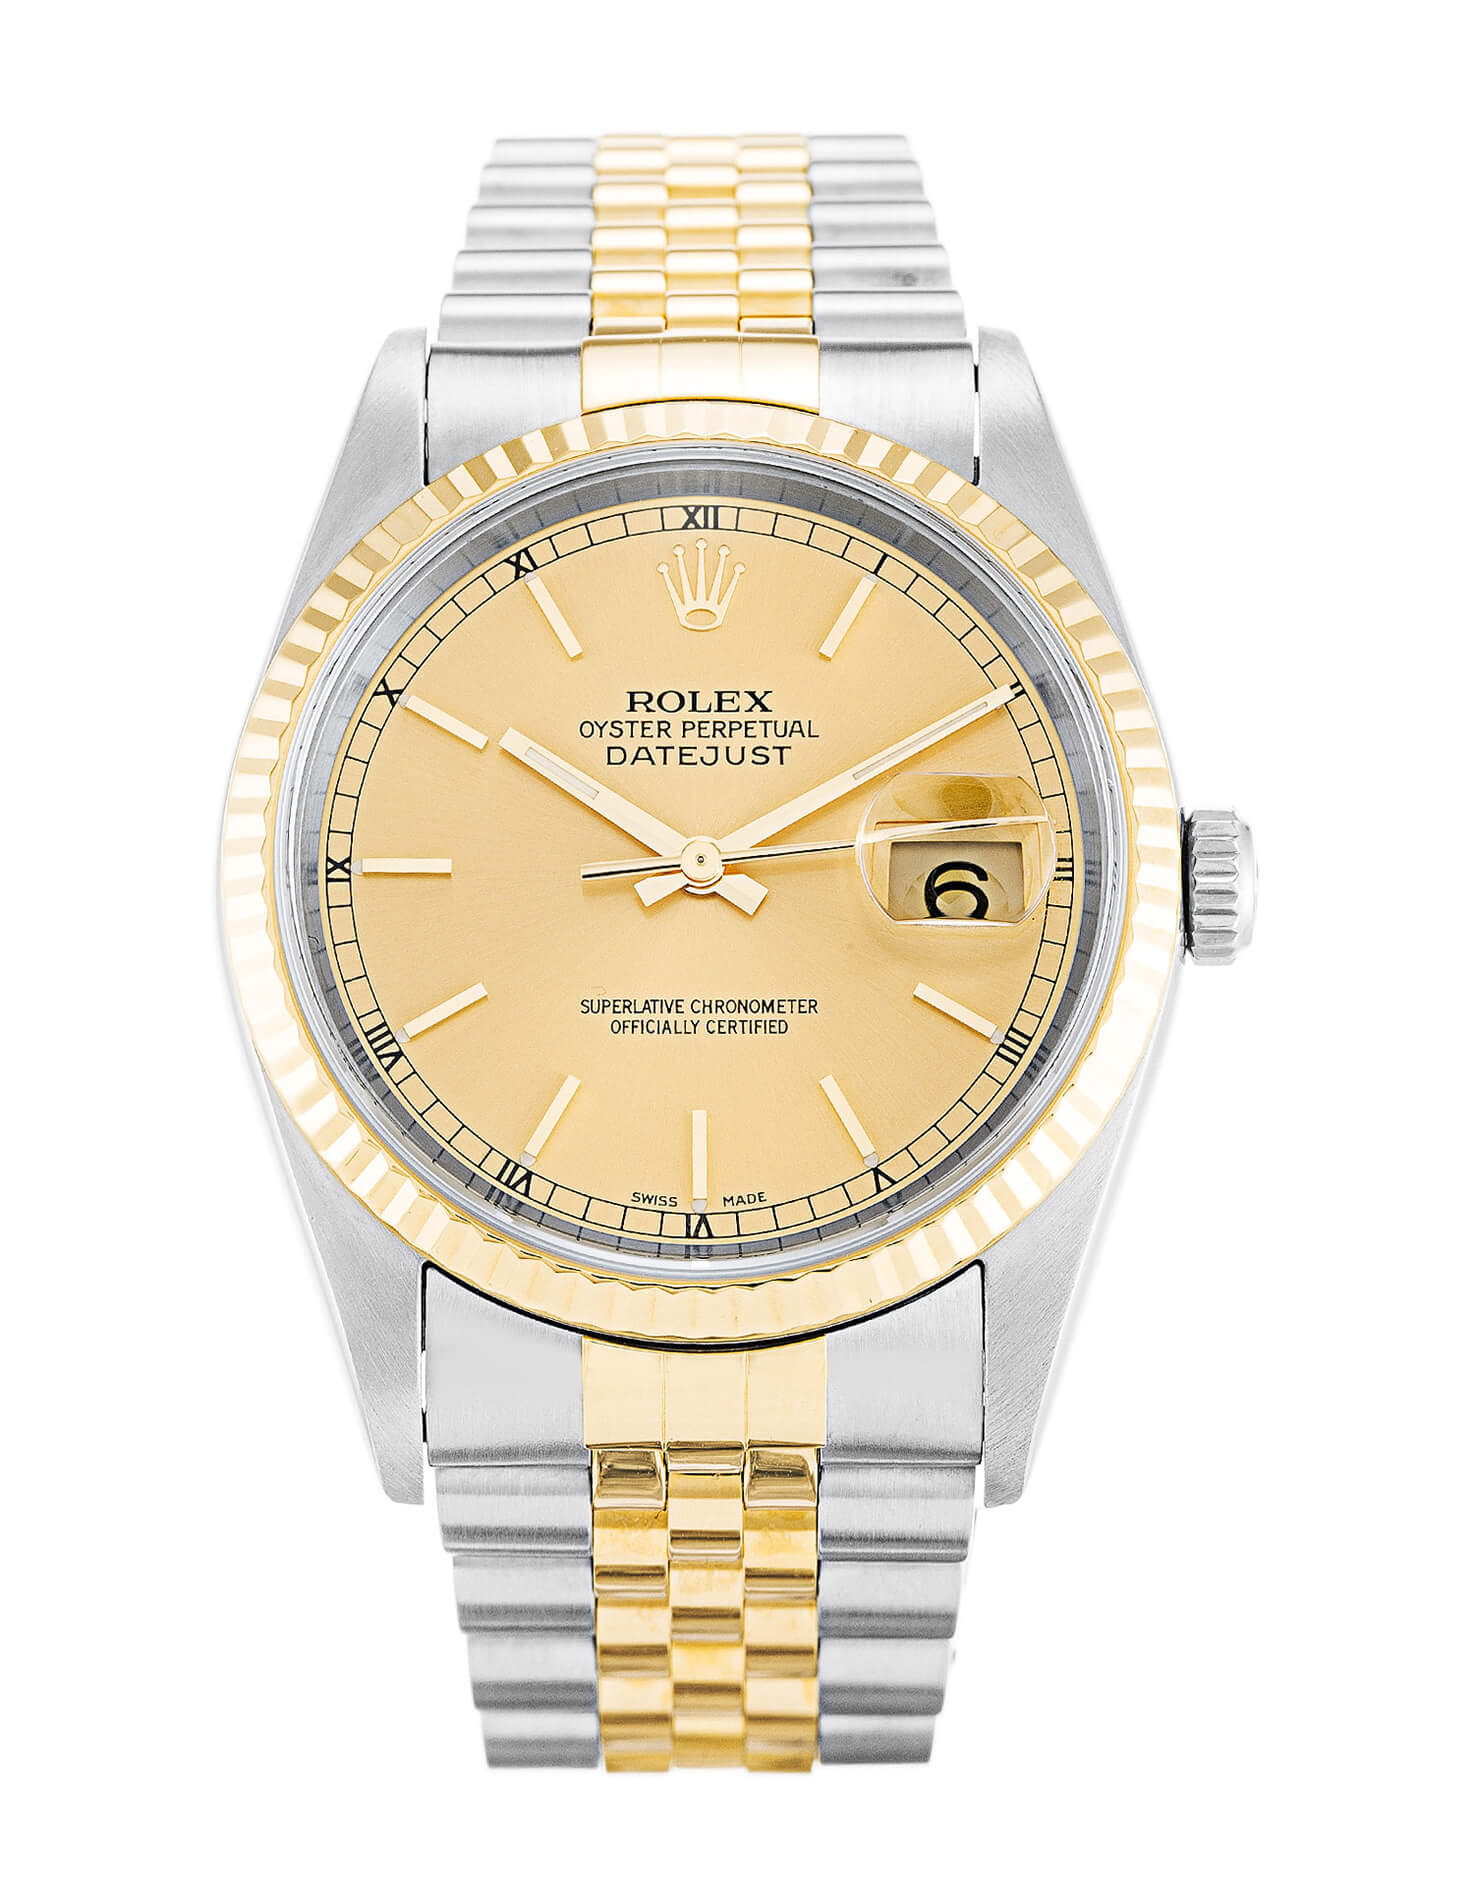 Father’s Day Rolex Replica Watches Ultimate Gift Guide